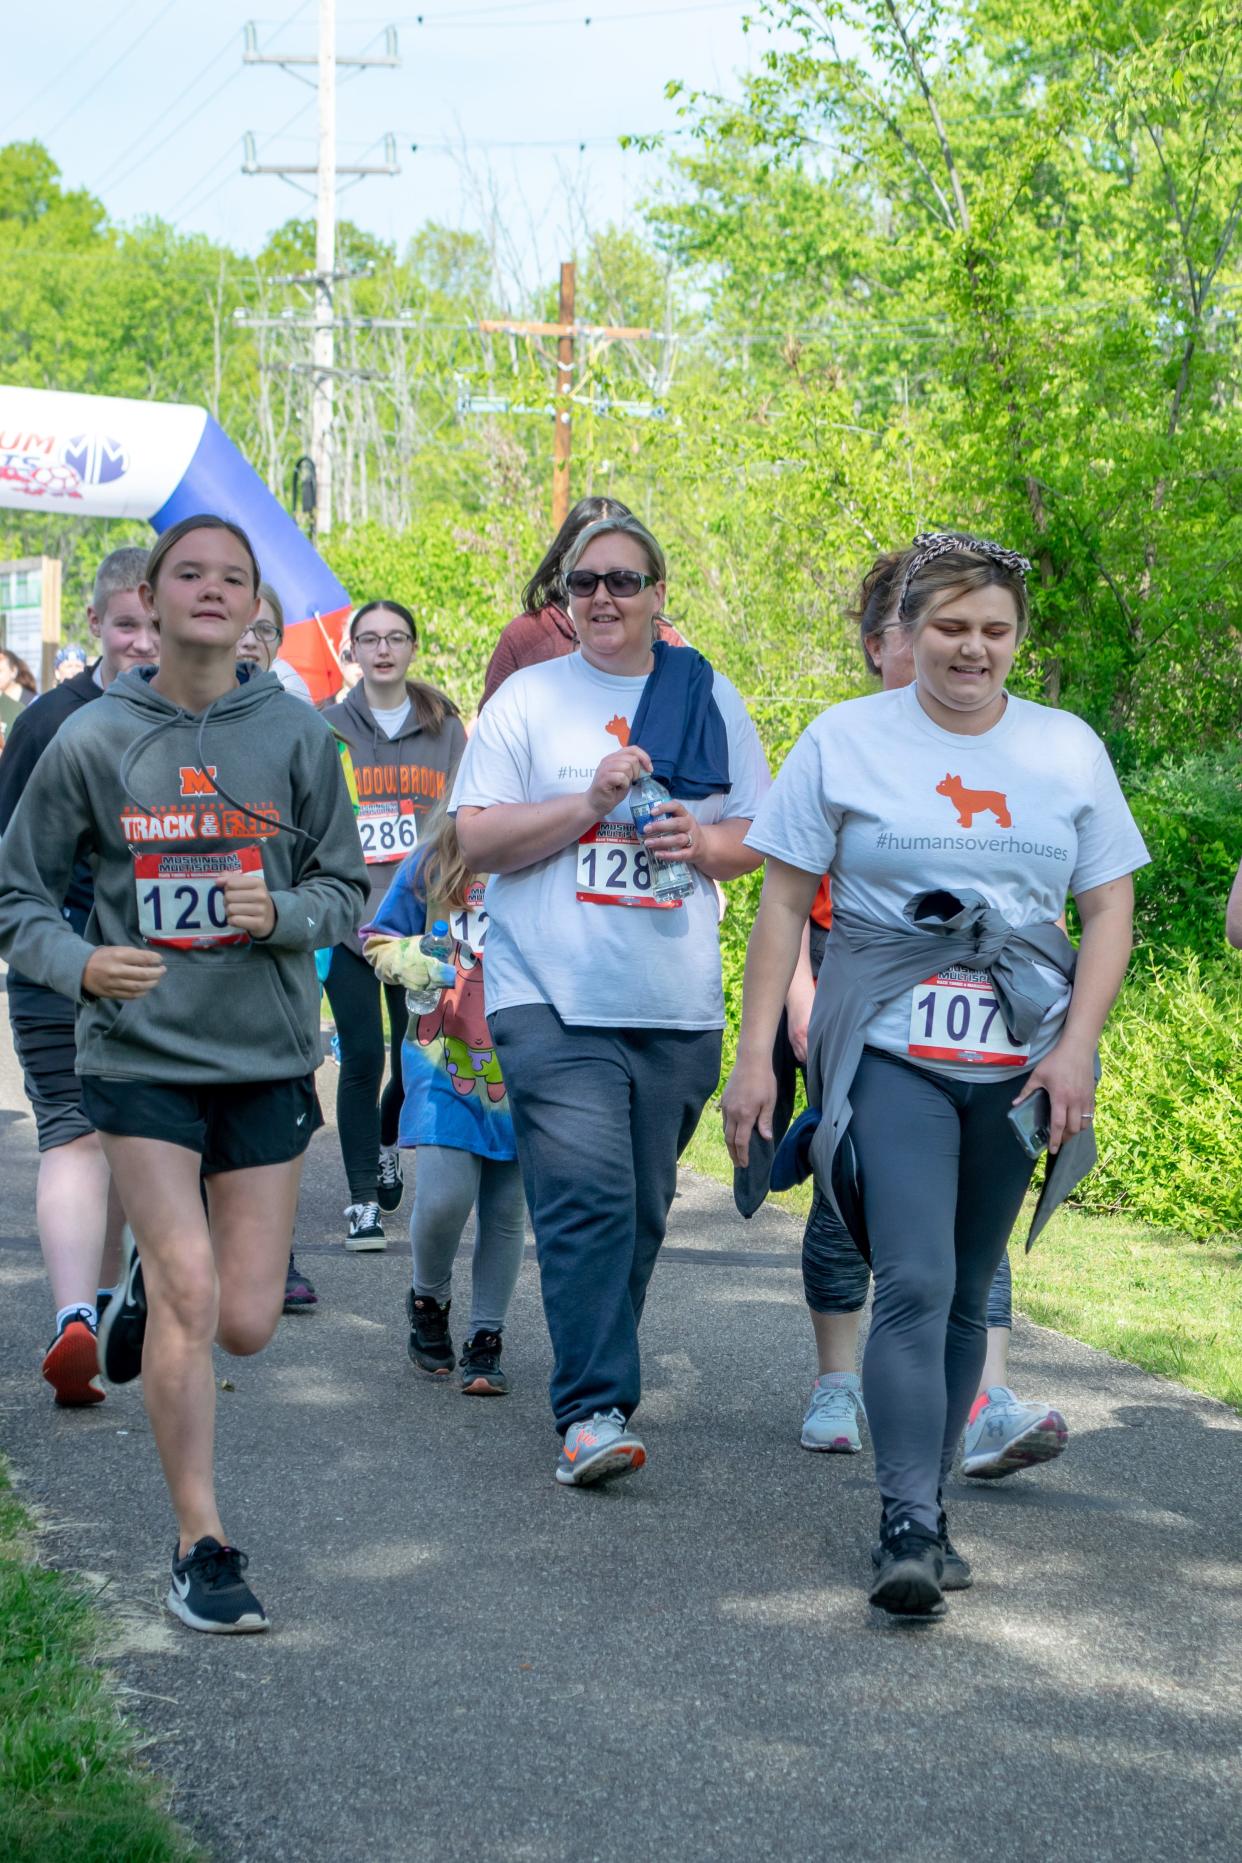 The Guernsey County Community Development Corp. will hold its Spring Race at the Great Guernsey Trail on May 18. Money raised from the race will go towards general maintenance, upkeep, and other costs associated with the trail.